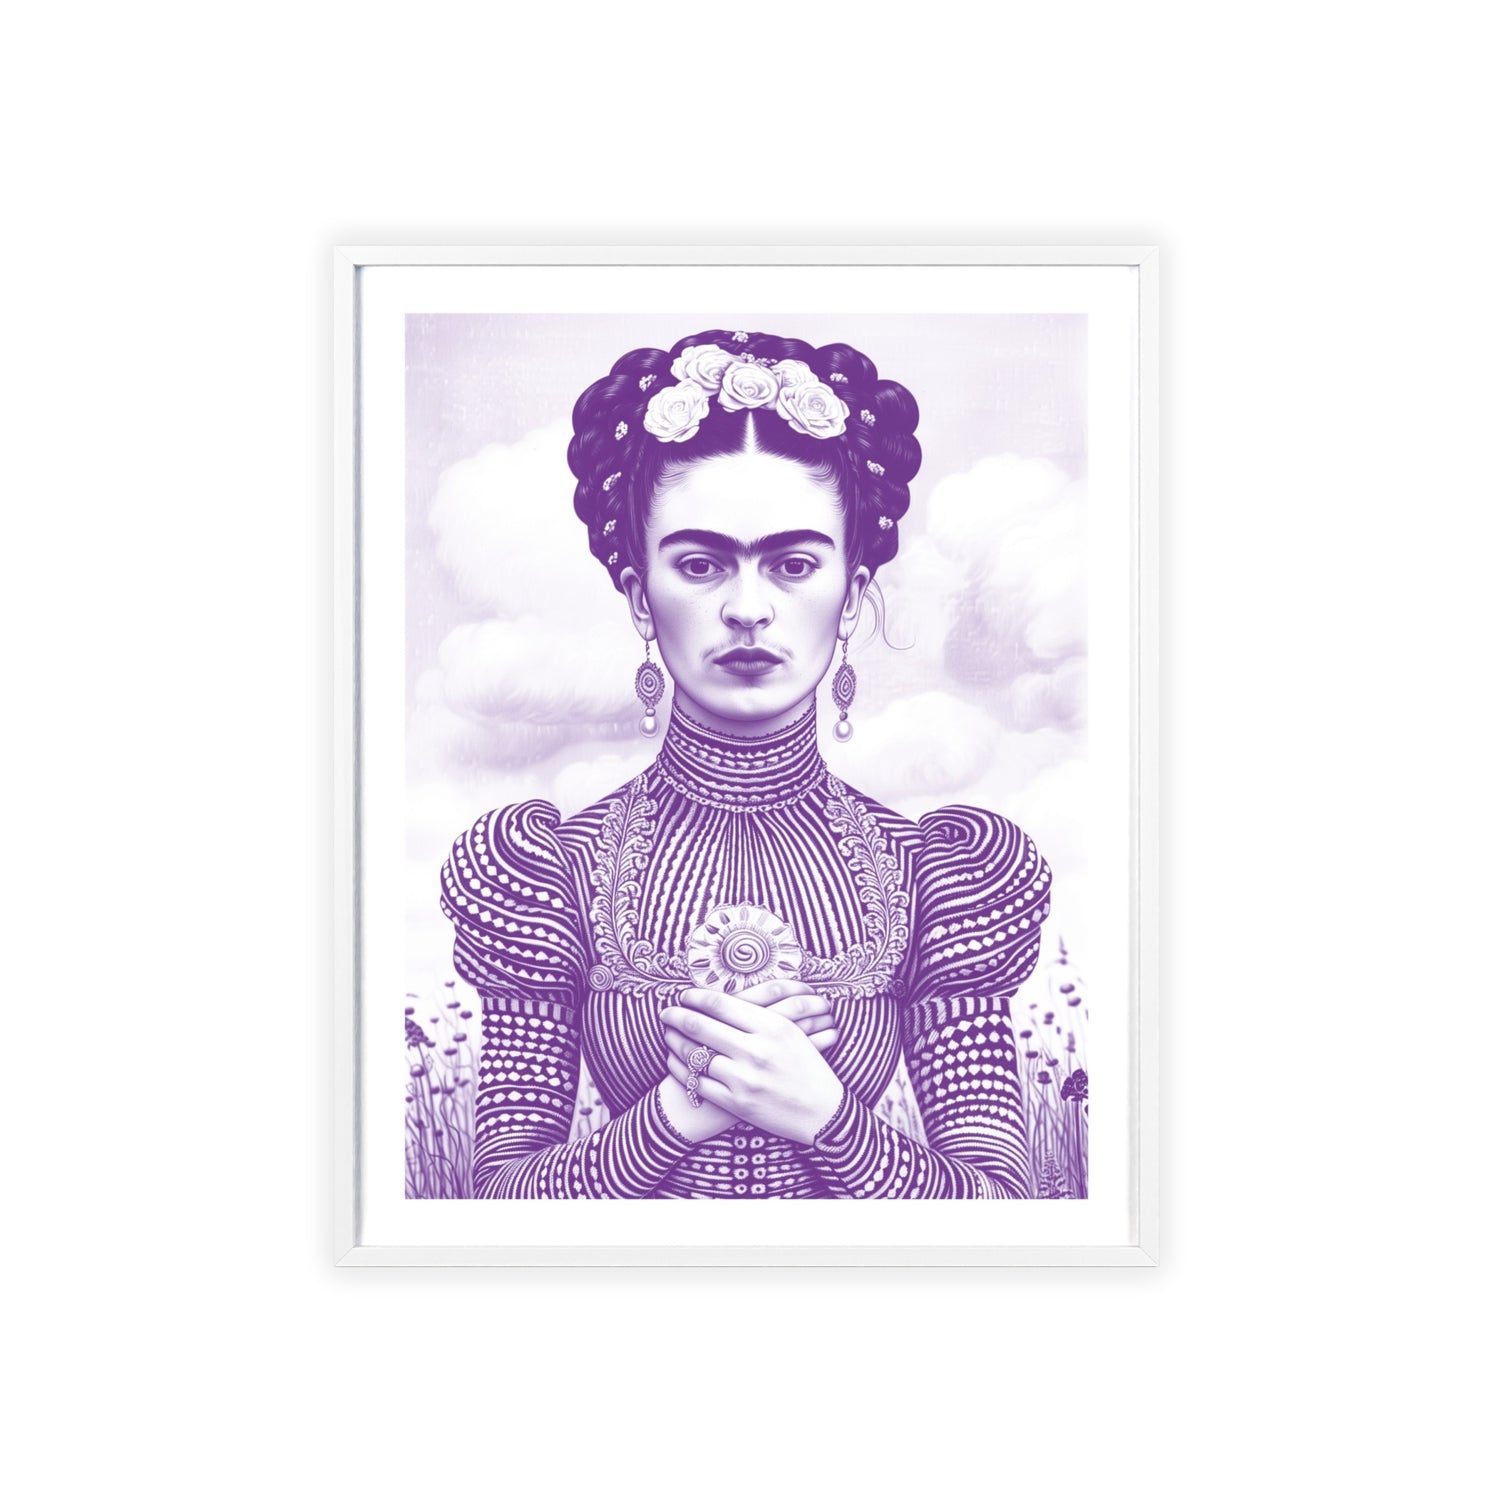 Must-Have Frida Portrait! Modern wall art in vibrant violet. Add a touch of elegance to your home decor. Shop now!